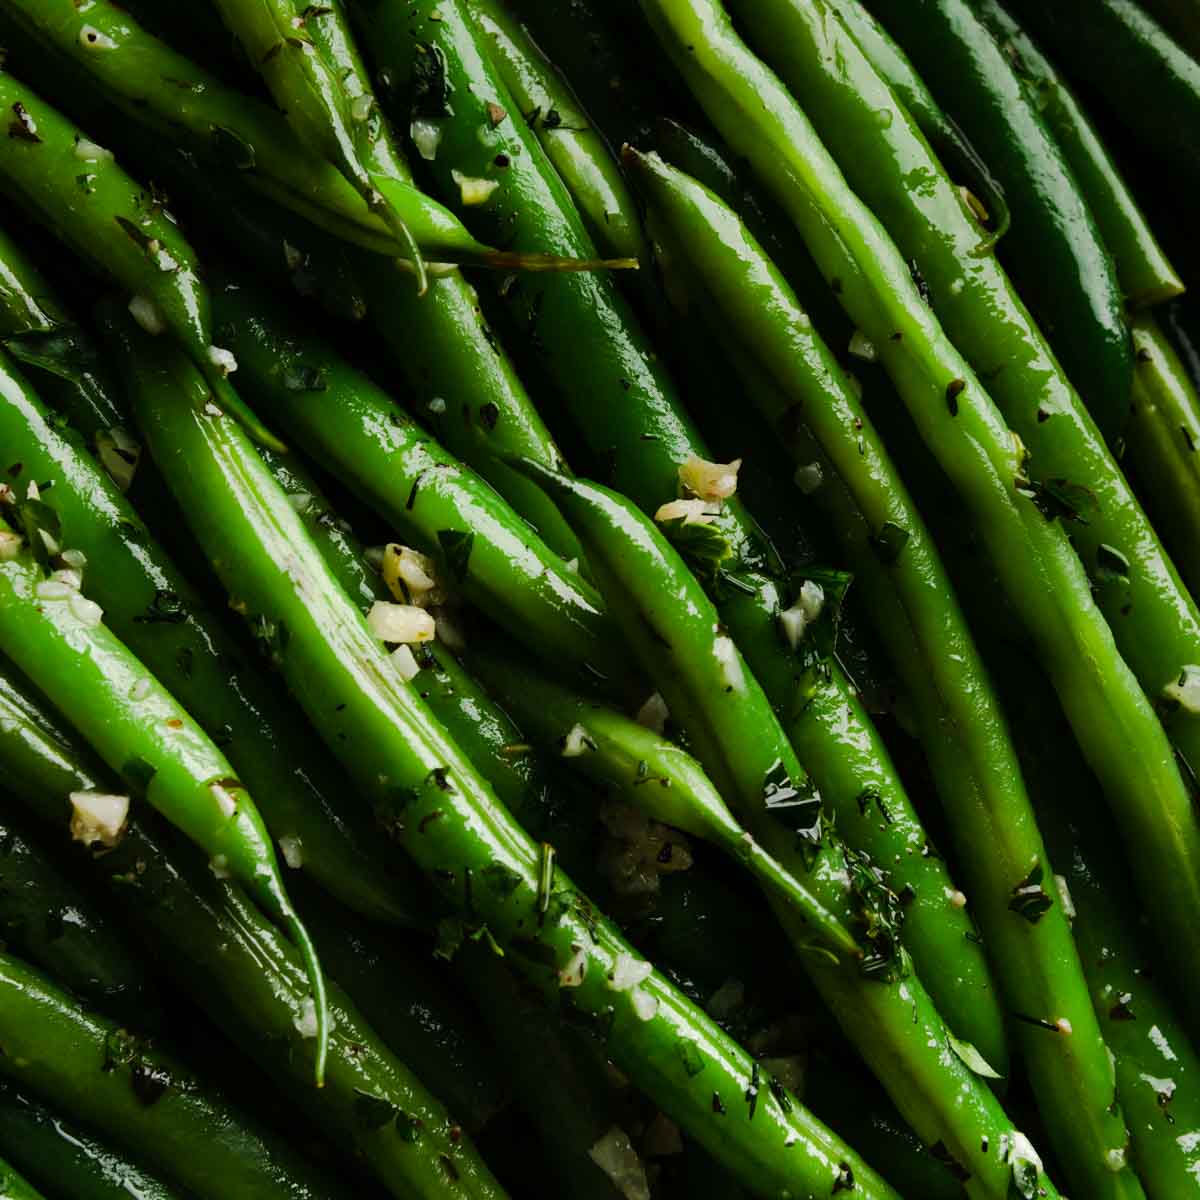 A close up image of haricot verts in garlic herb butter.